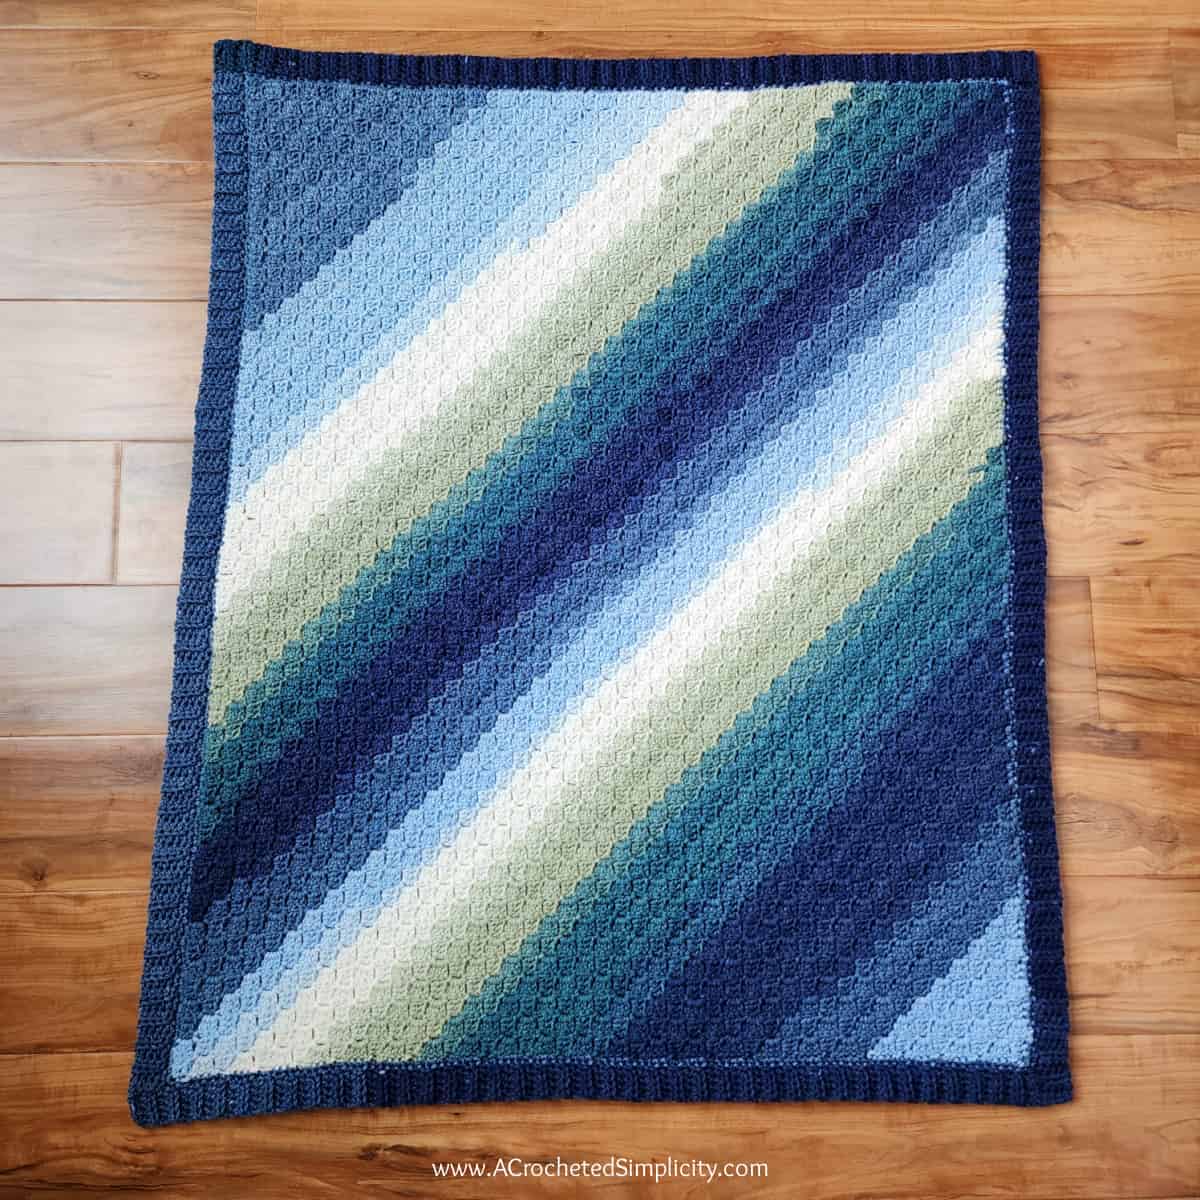 Crochet C2C rectangle baby blanket in blue ombre yarn laying on a wood floor.